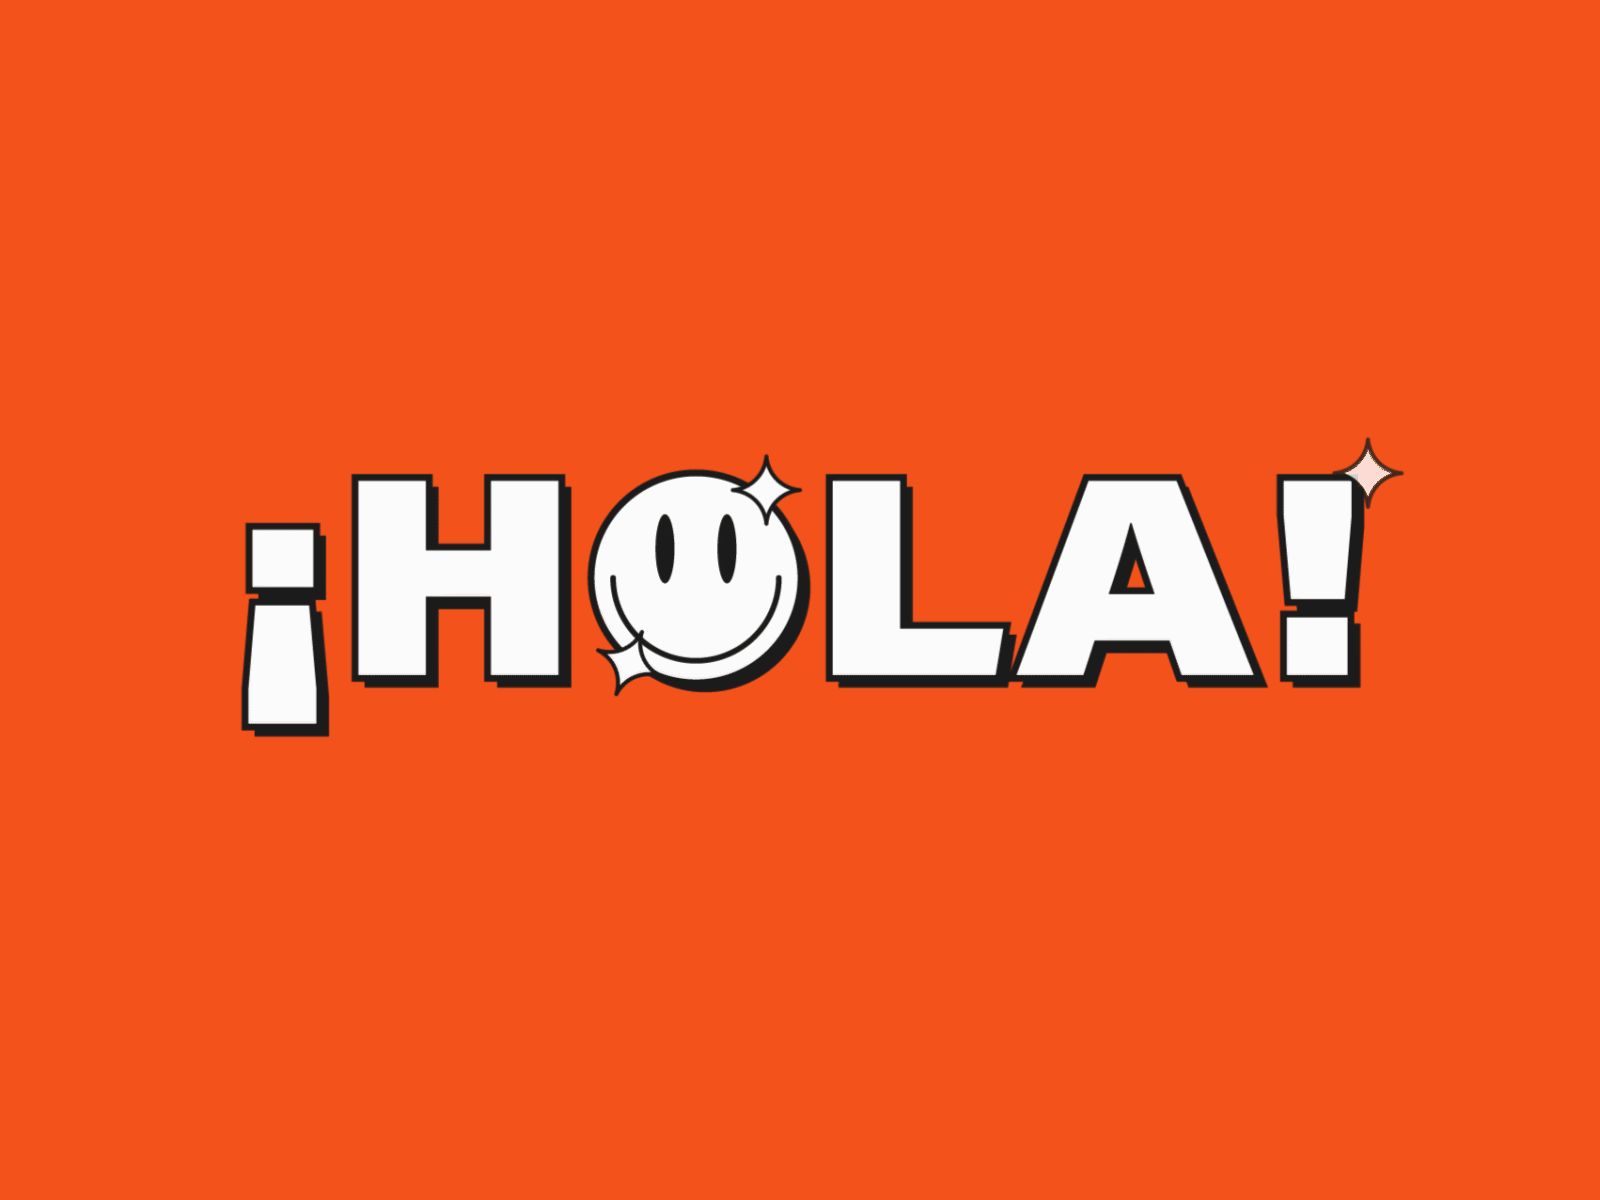 ¡Hello Dribbble! In spain we call it HOLA